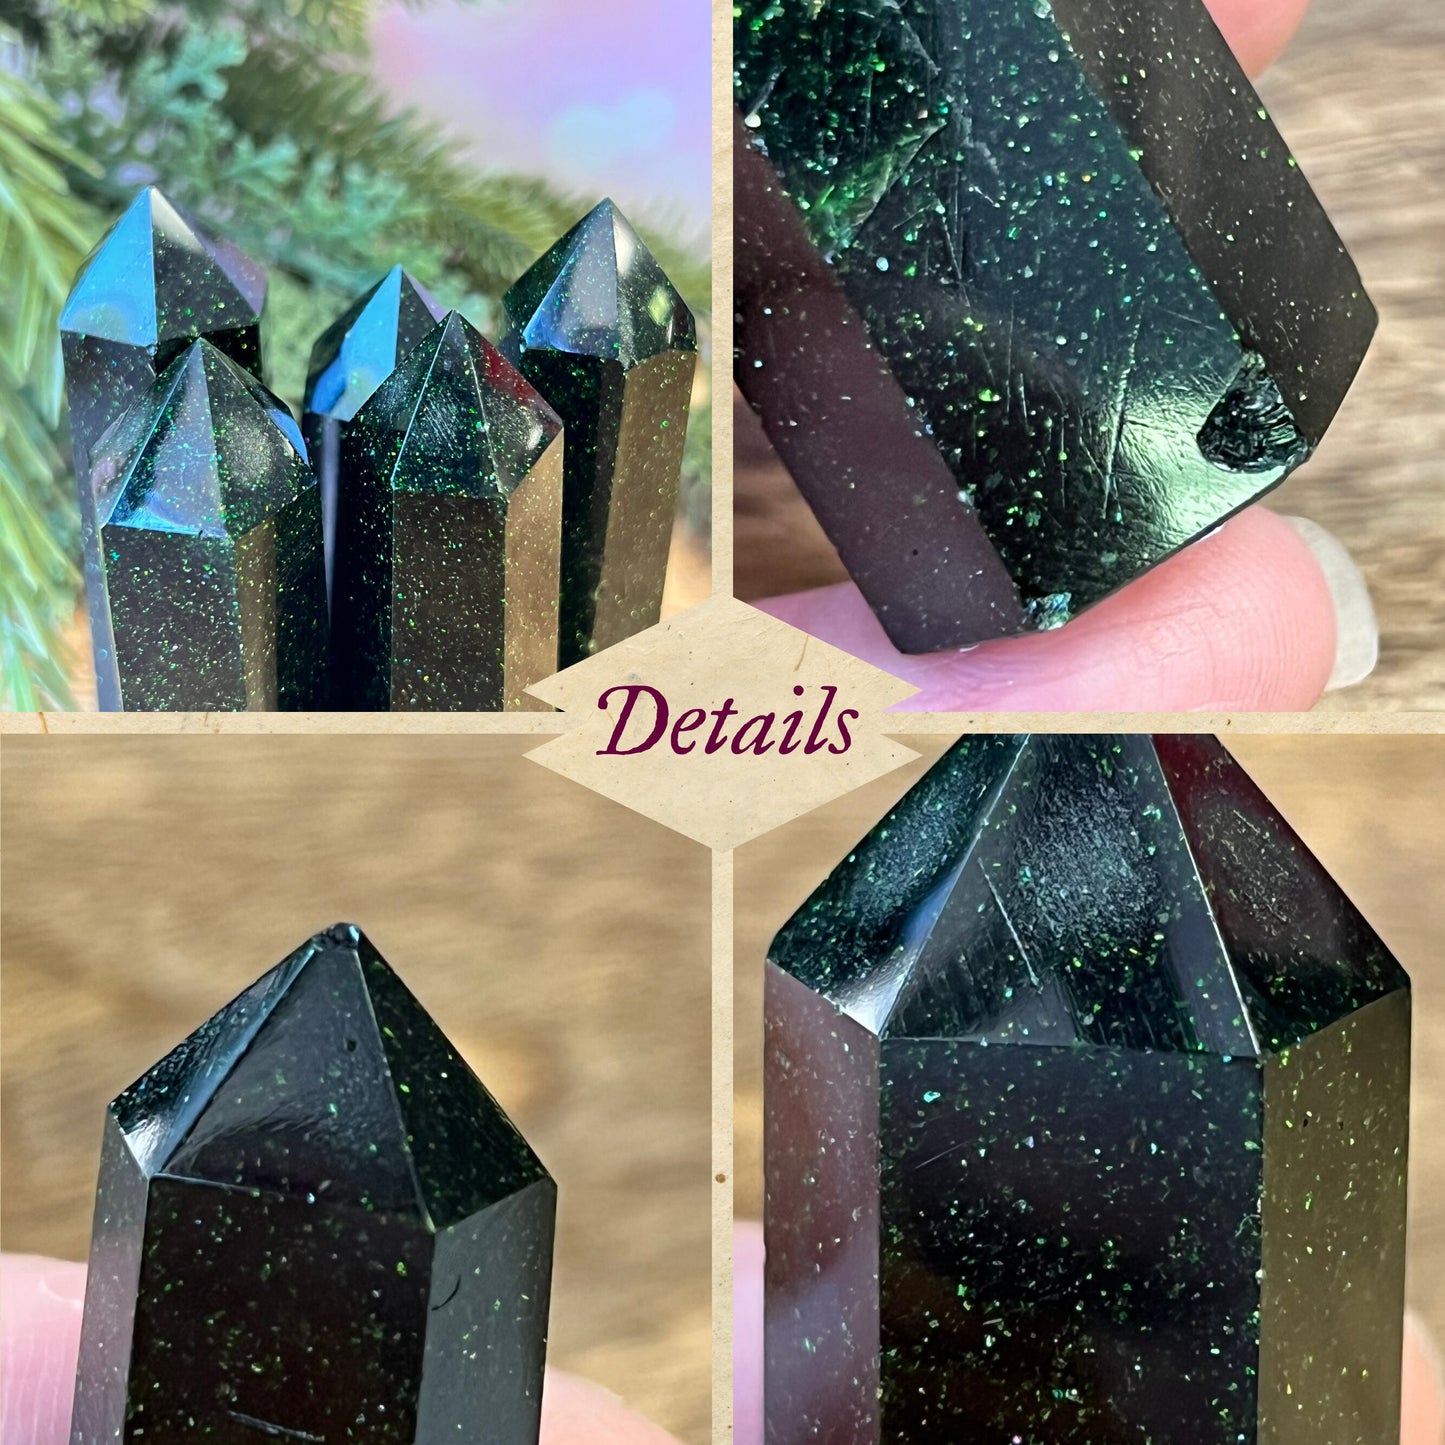 Green Goldstone Crystal Tower - You get one